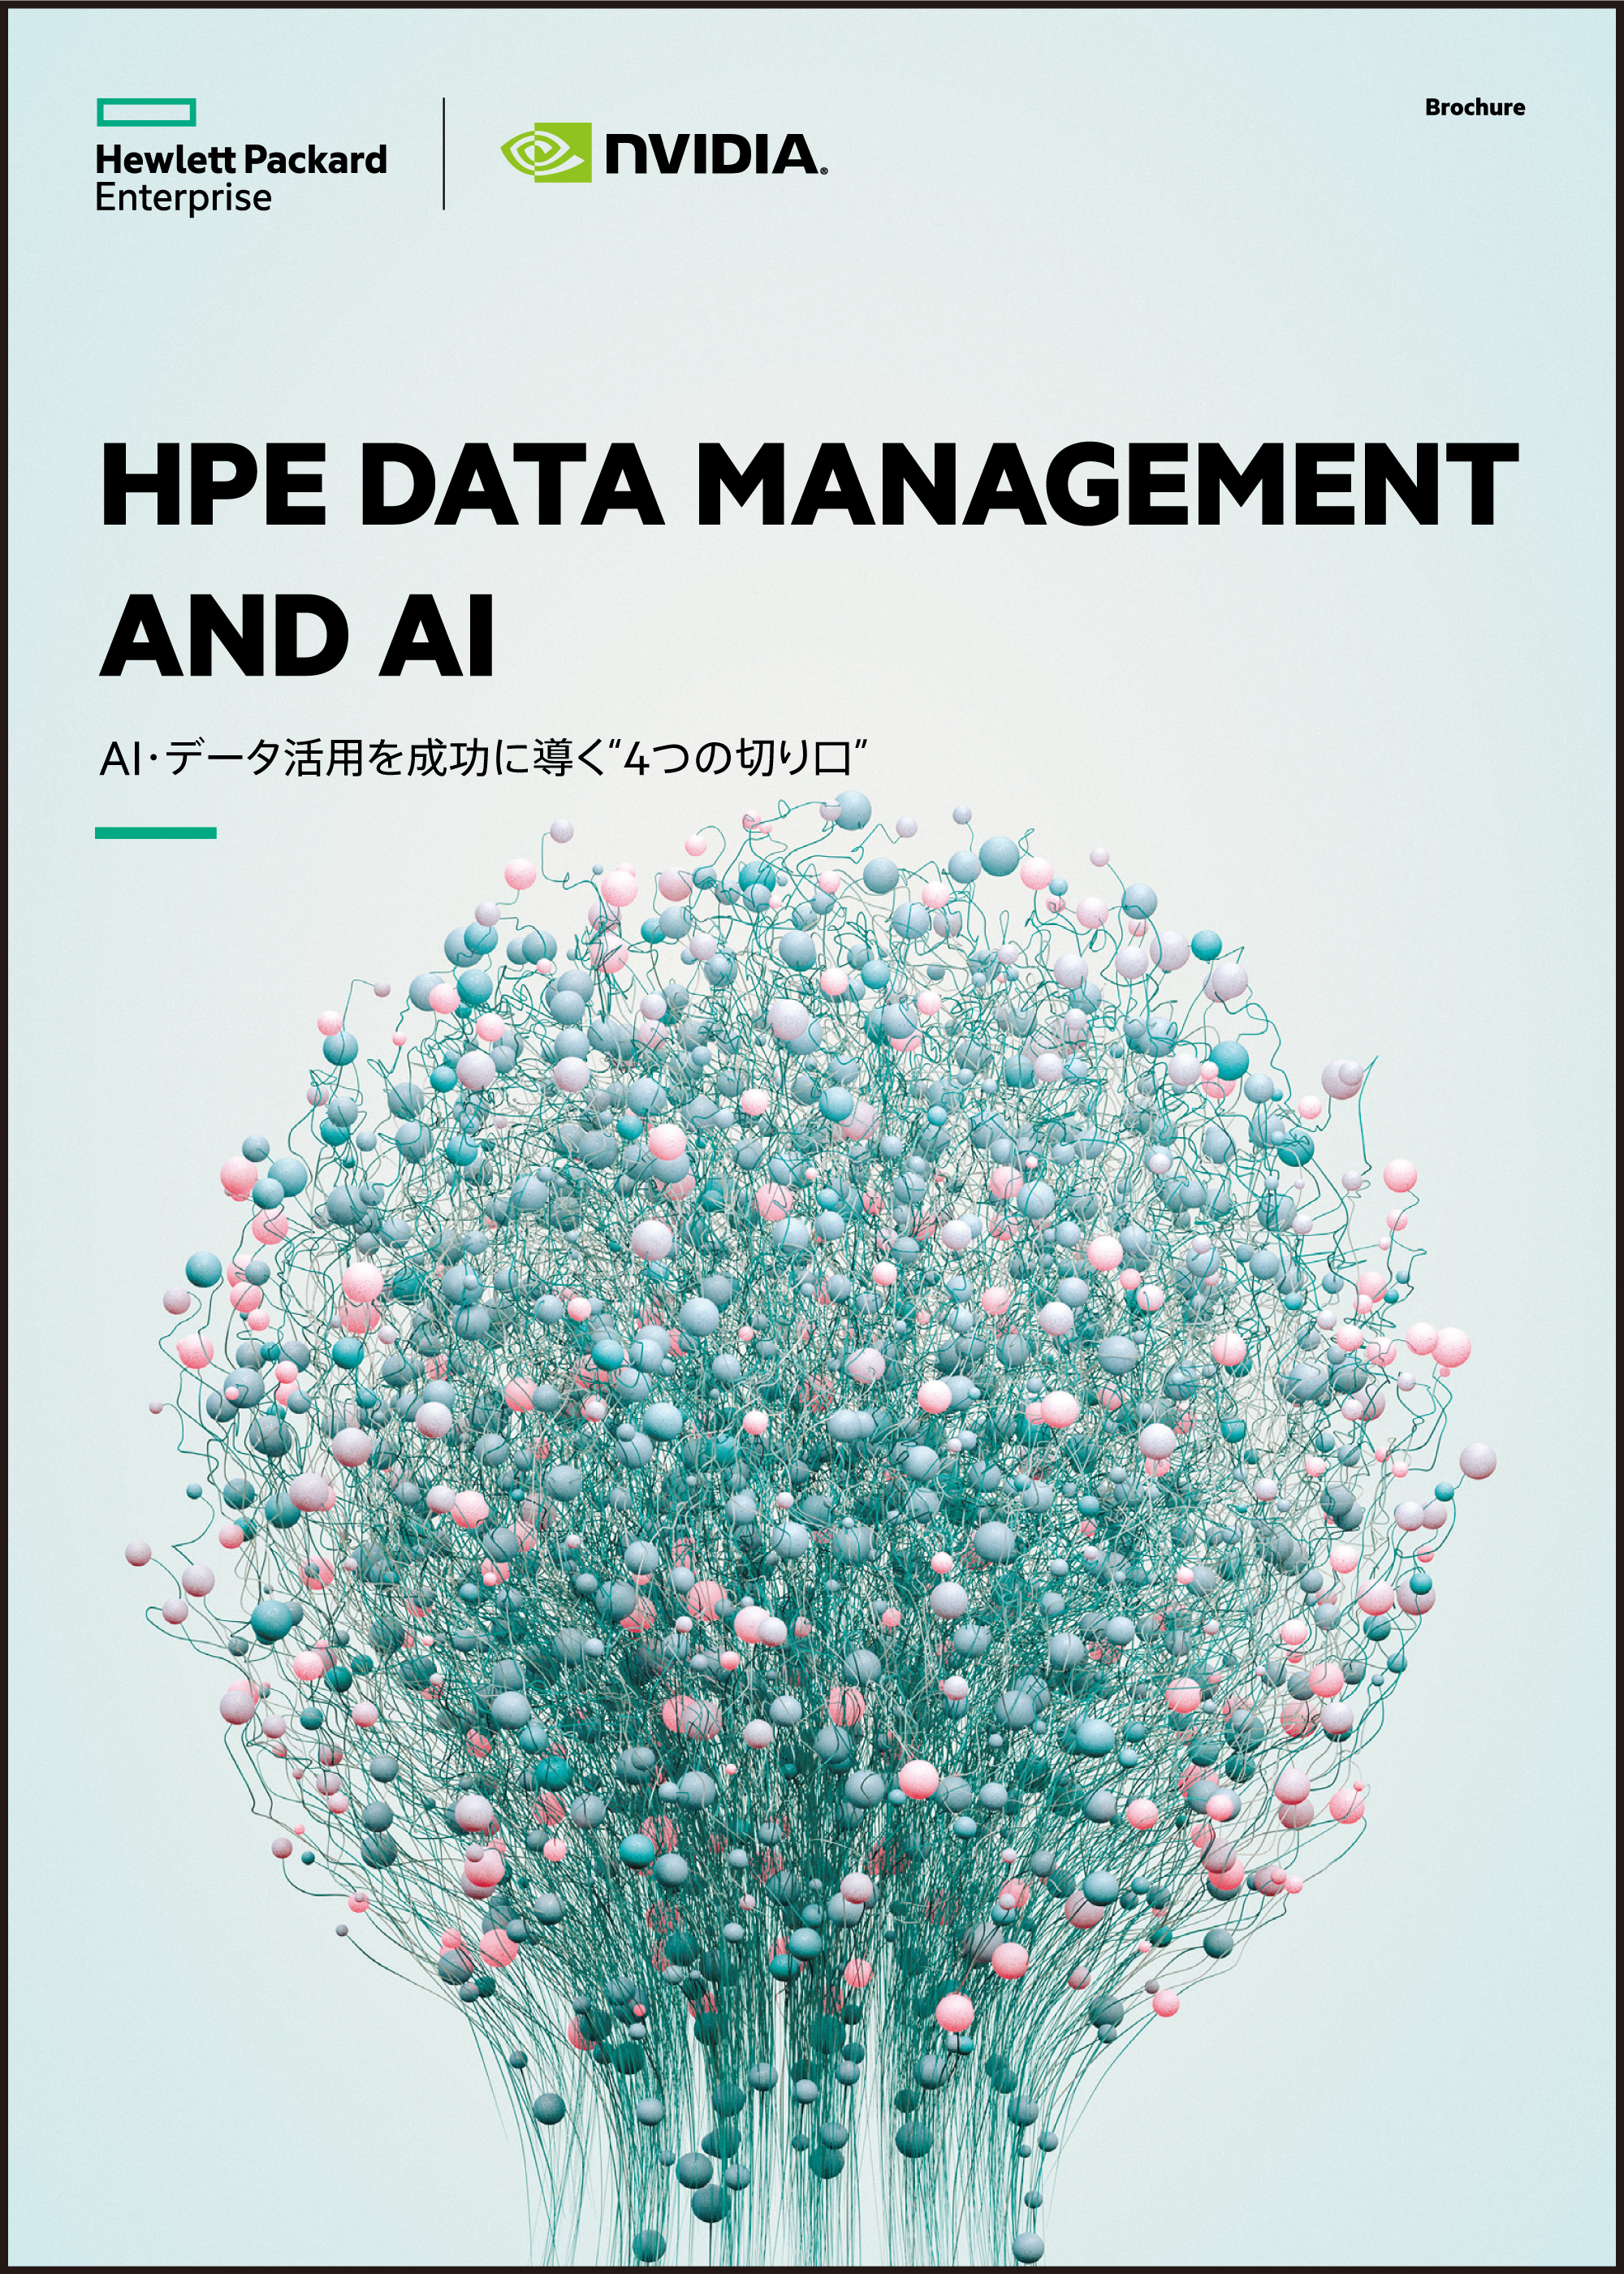 HPE DATA MANAGEMENT AND AI